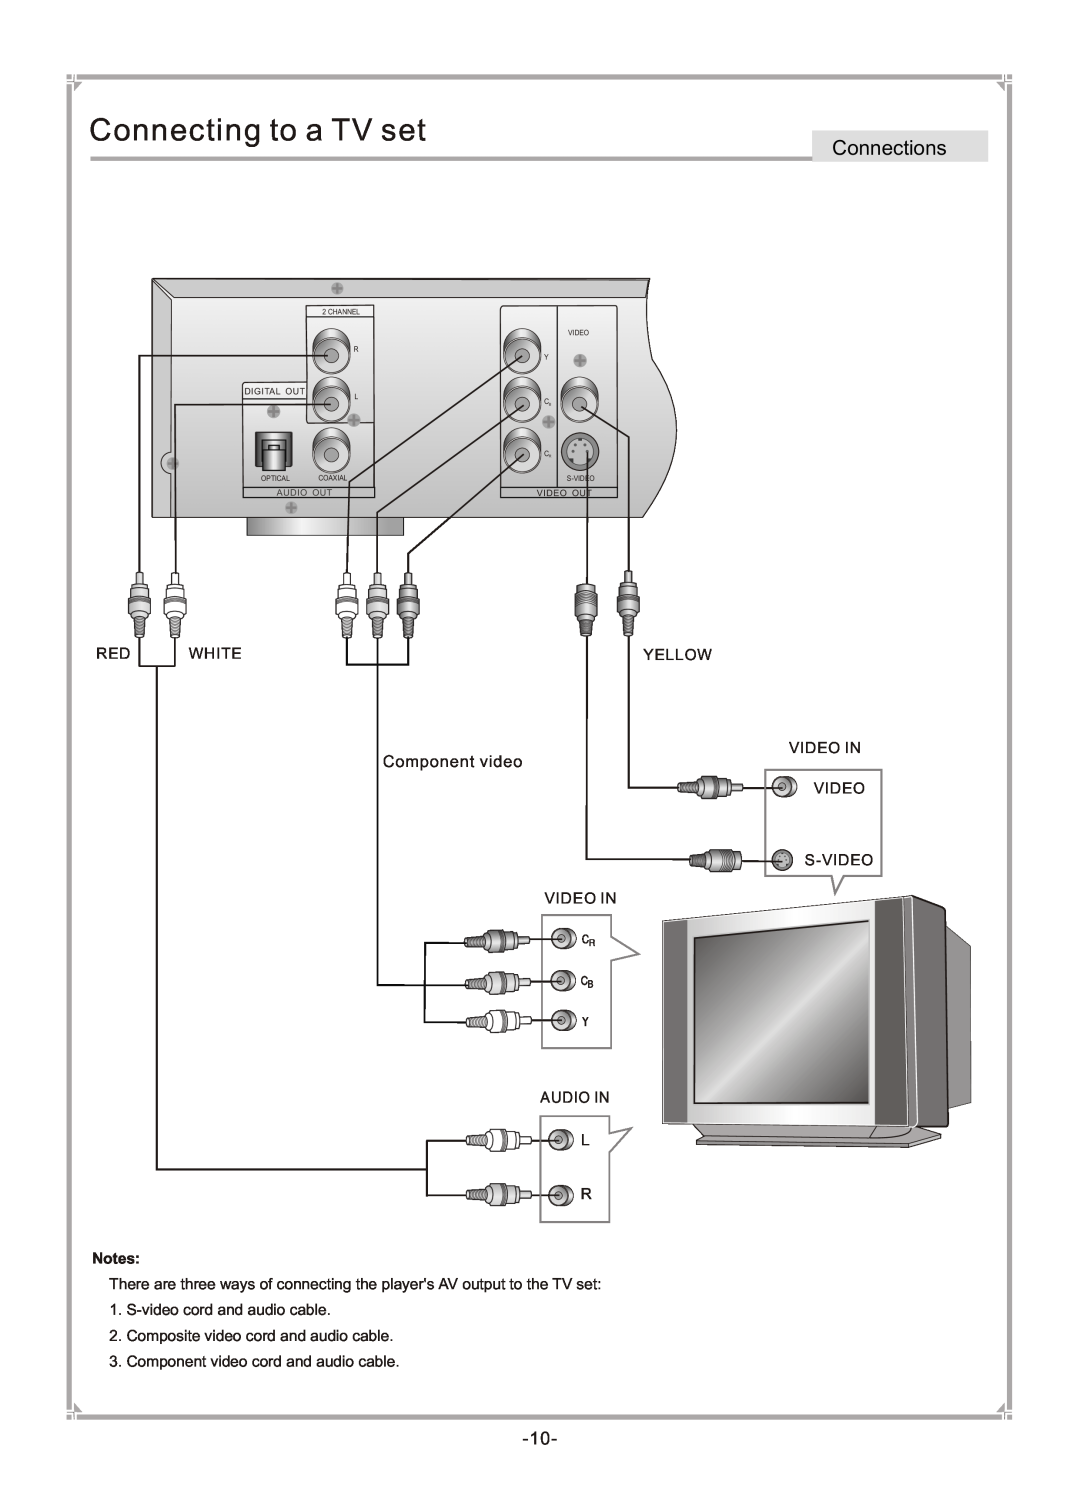 GoVideo DVP745 user manual Connecting to a TV set, Connections, Component video, Audio Out, Channel R, L Optical Coaxial 